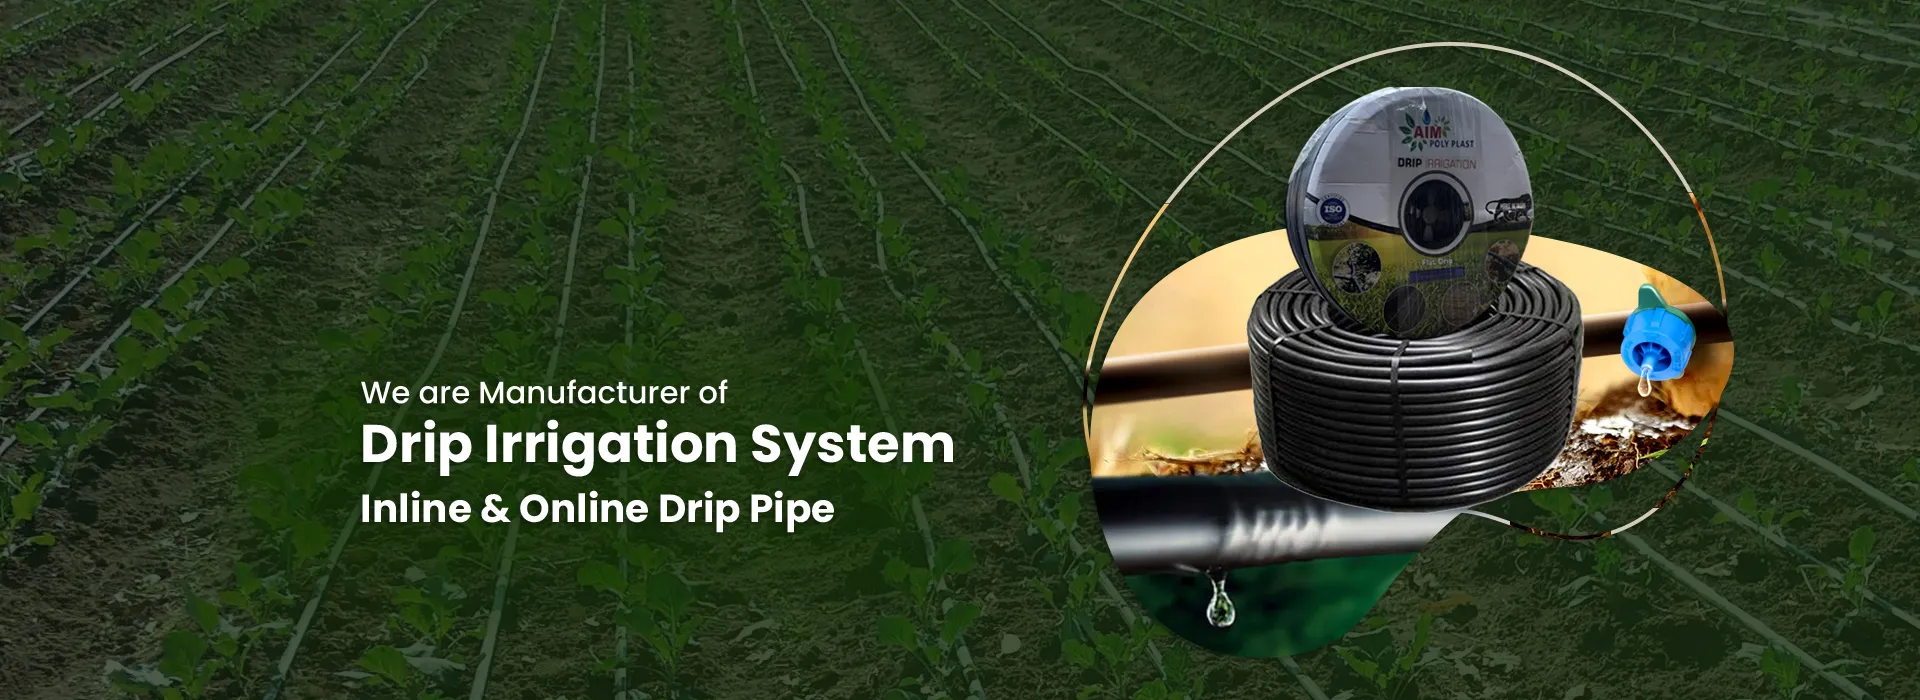 Drip Irrigation Pipe Manufacturers in Ahmedabad